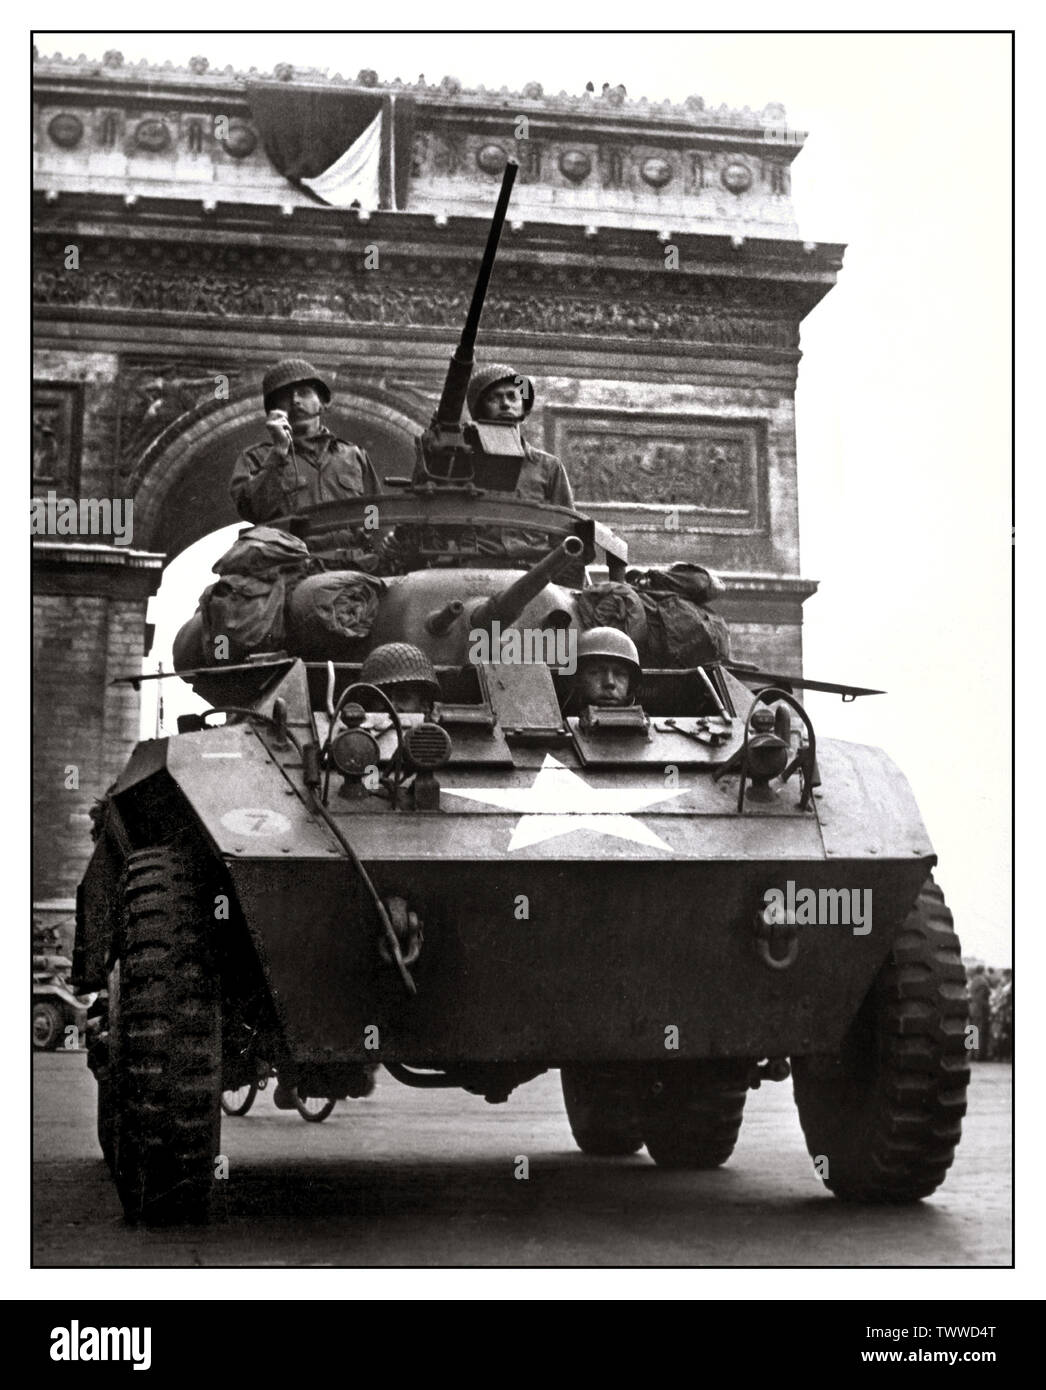 PARIS LIBERATION Vintage WW2 image of American soldiers in armoured vehicle during the liberation of Paris France the Tricolor flying from the Arc de Triomphe American armoured vehicle in Paris, August 1944. Stock Photo